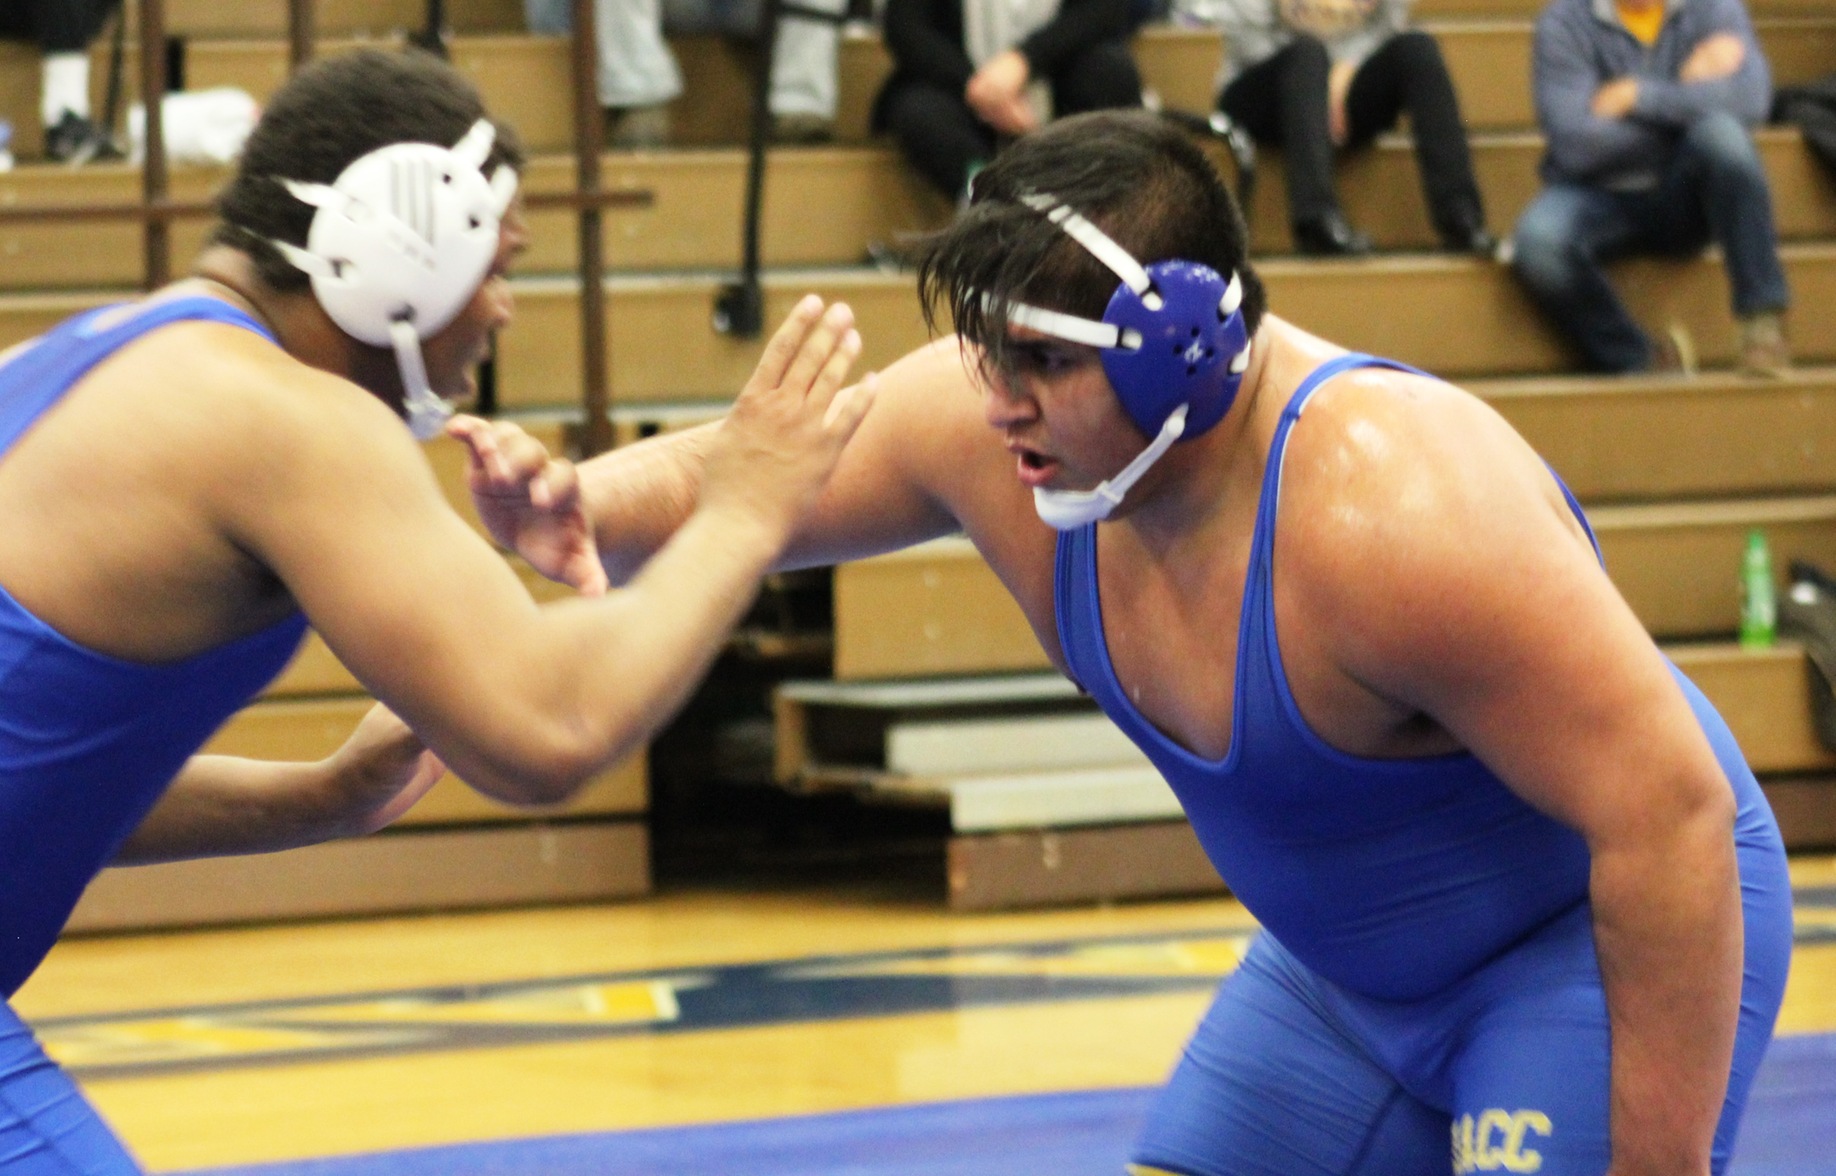 NIACC's Mario Pena is ranked fourth at 285 pounds heading into Sunday's district meet.